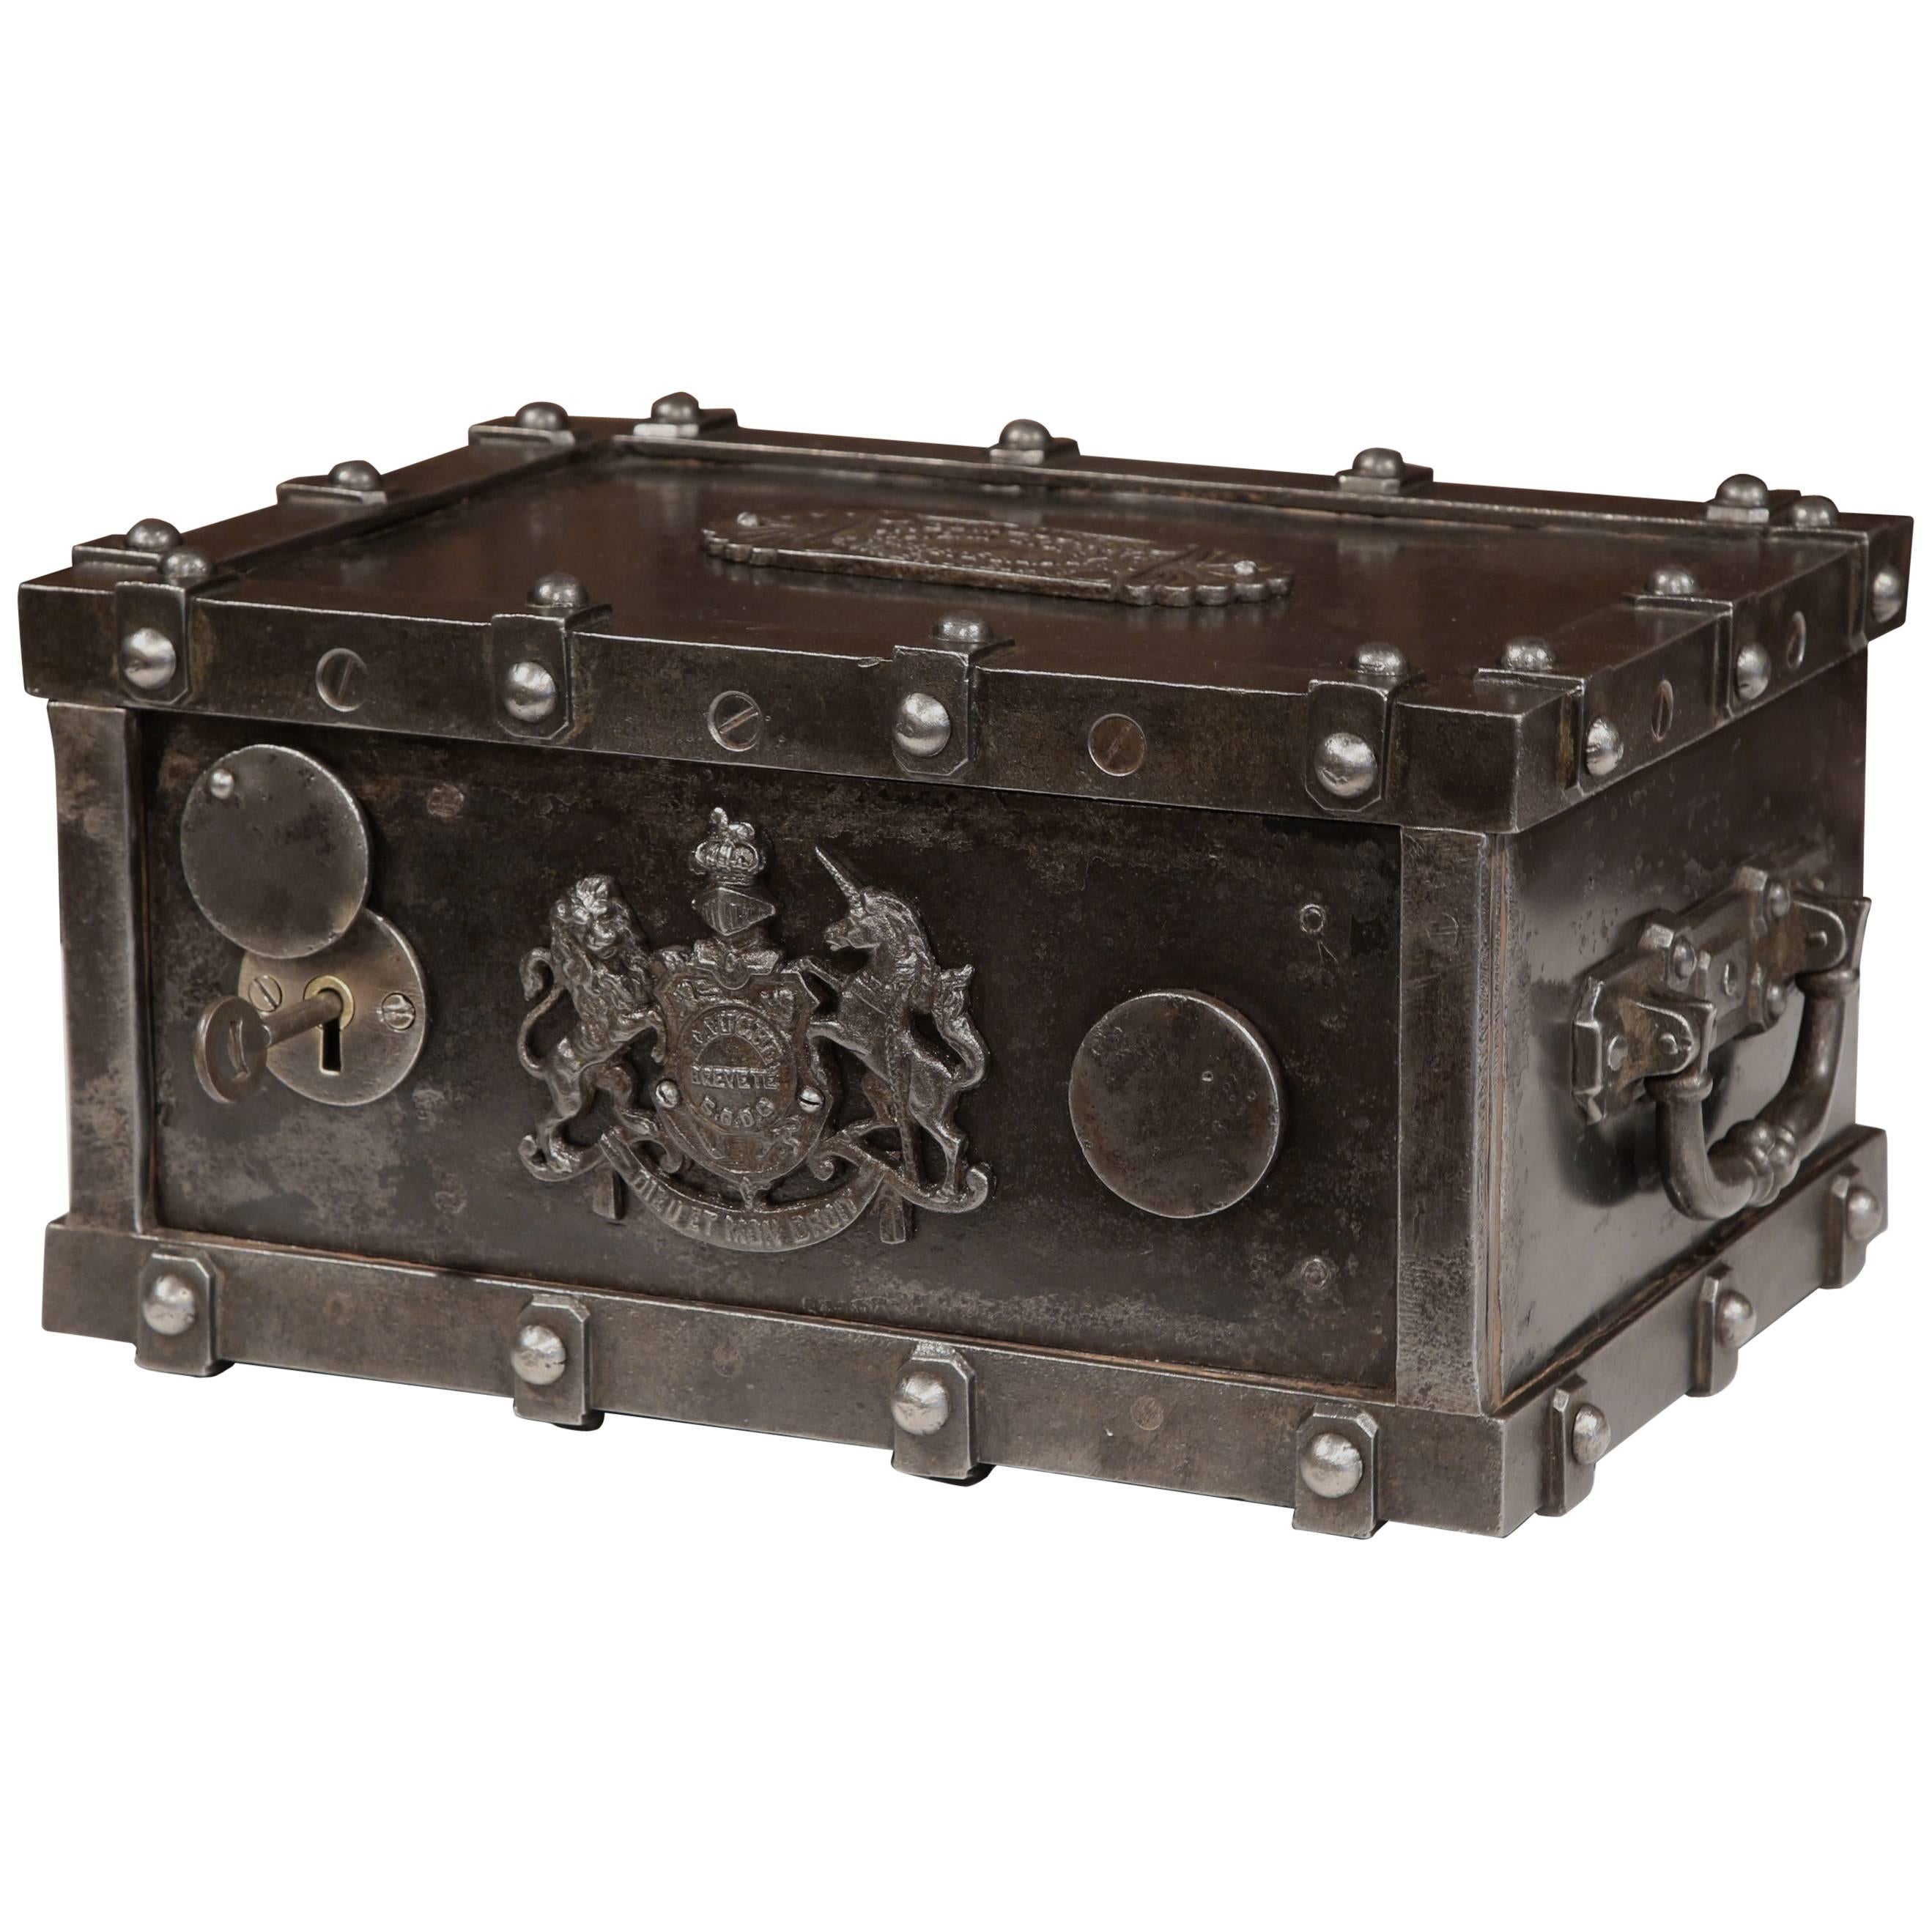 19th Century French Polished Cast Iron Safe with Coat of Arms and Handles